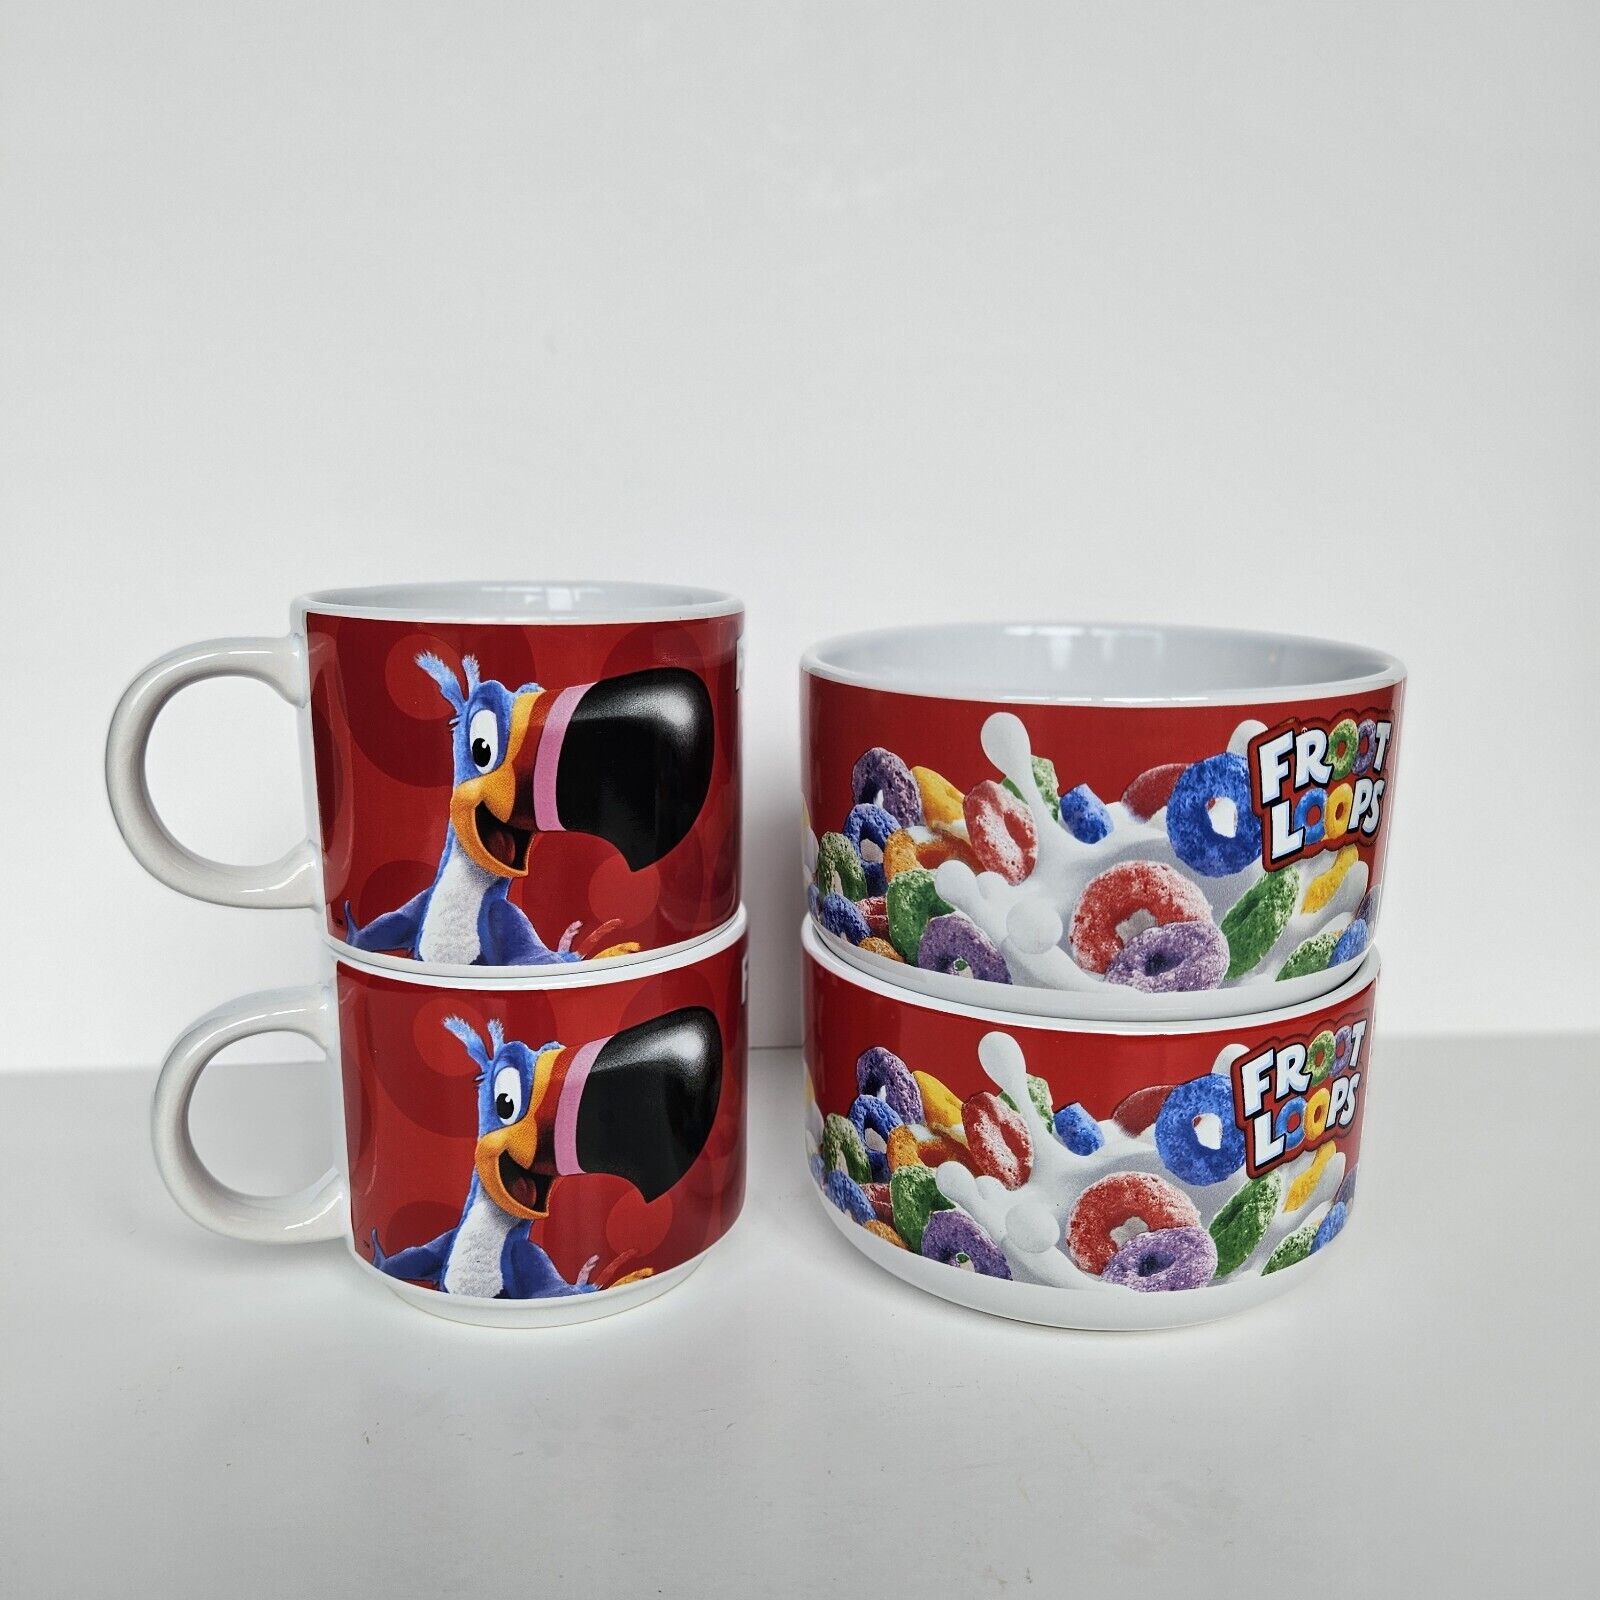 Kelloggs Fruit Loops Coffee Mugs and Bowls Glass Toucan Sam Cereal Set of 4